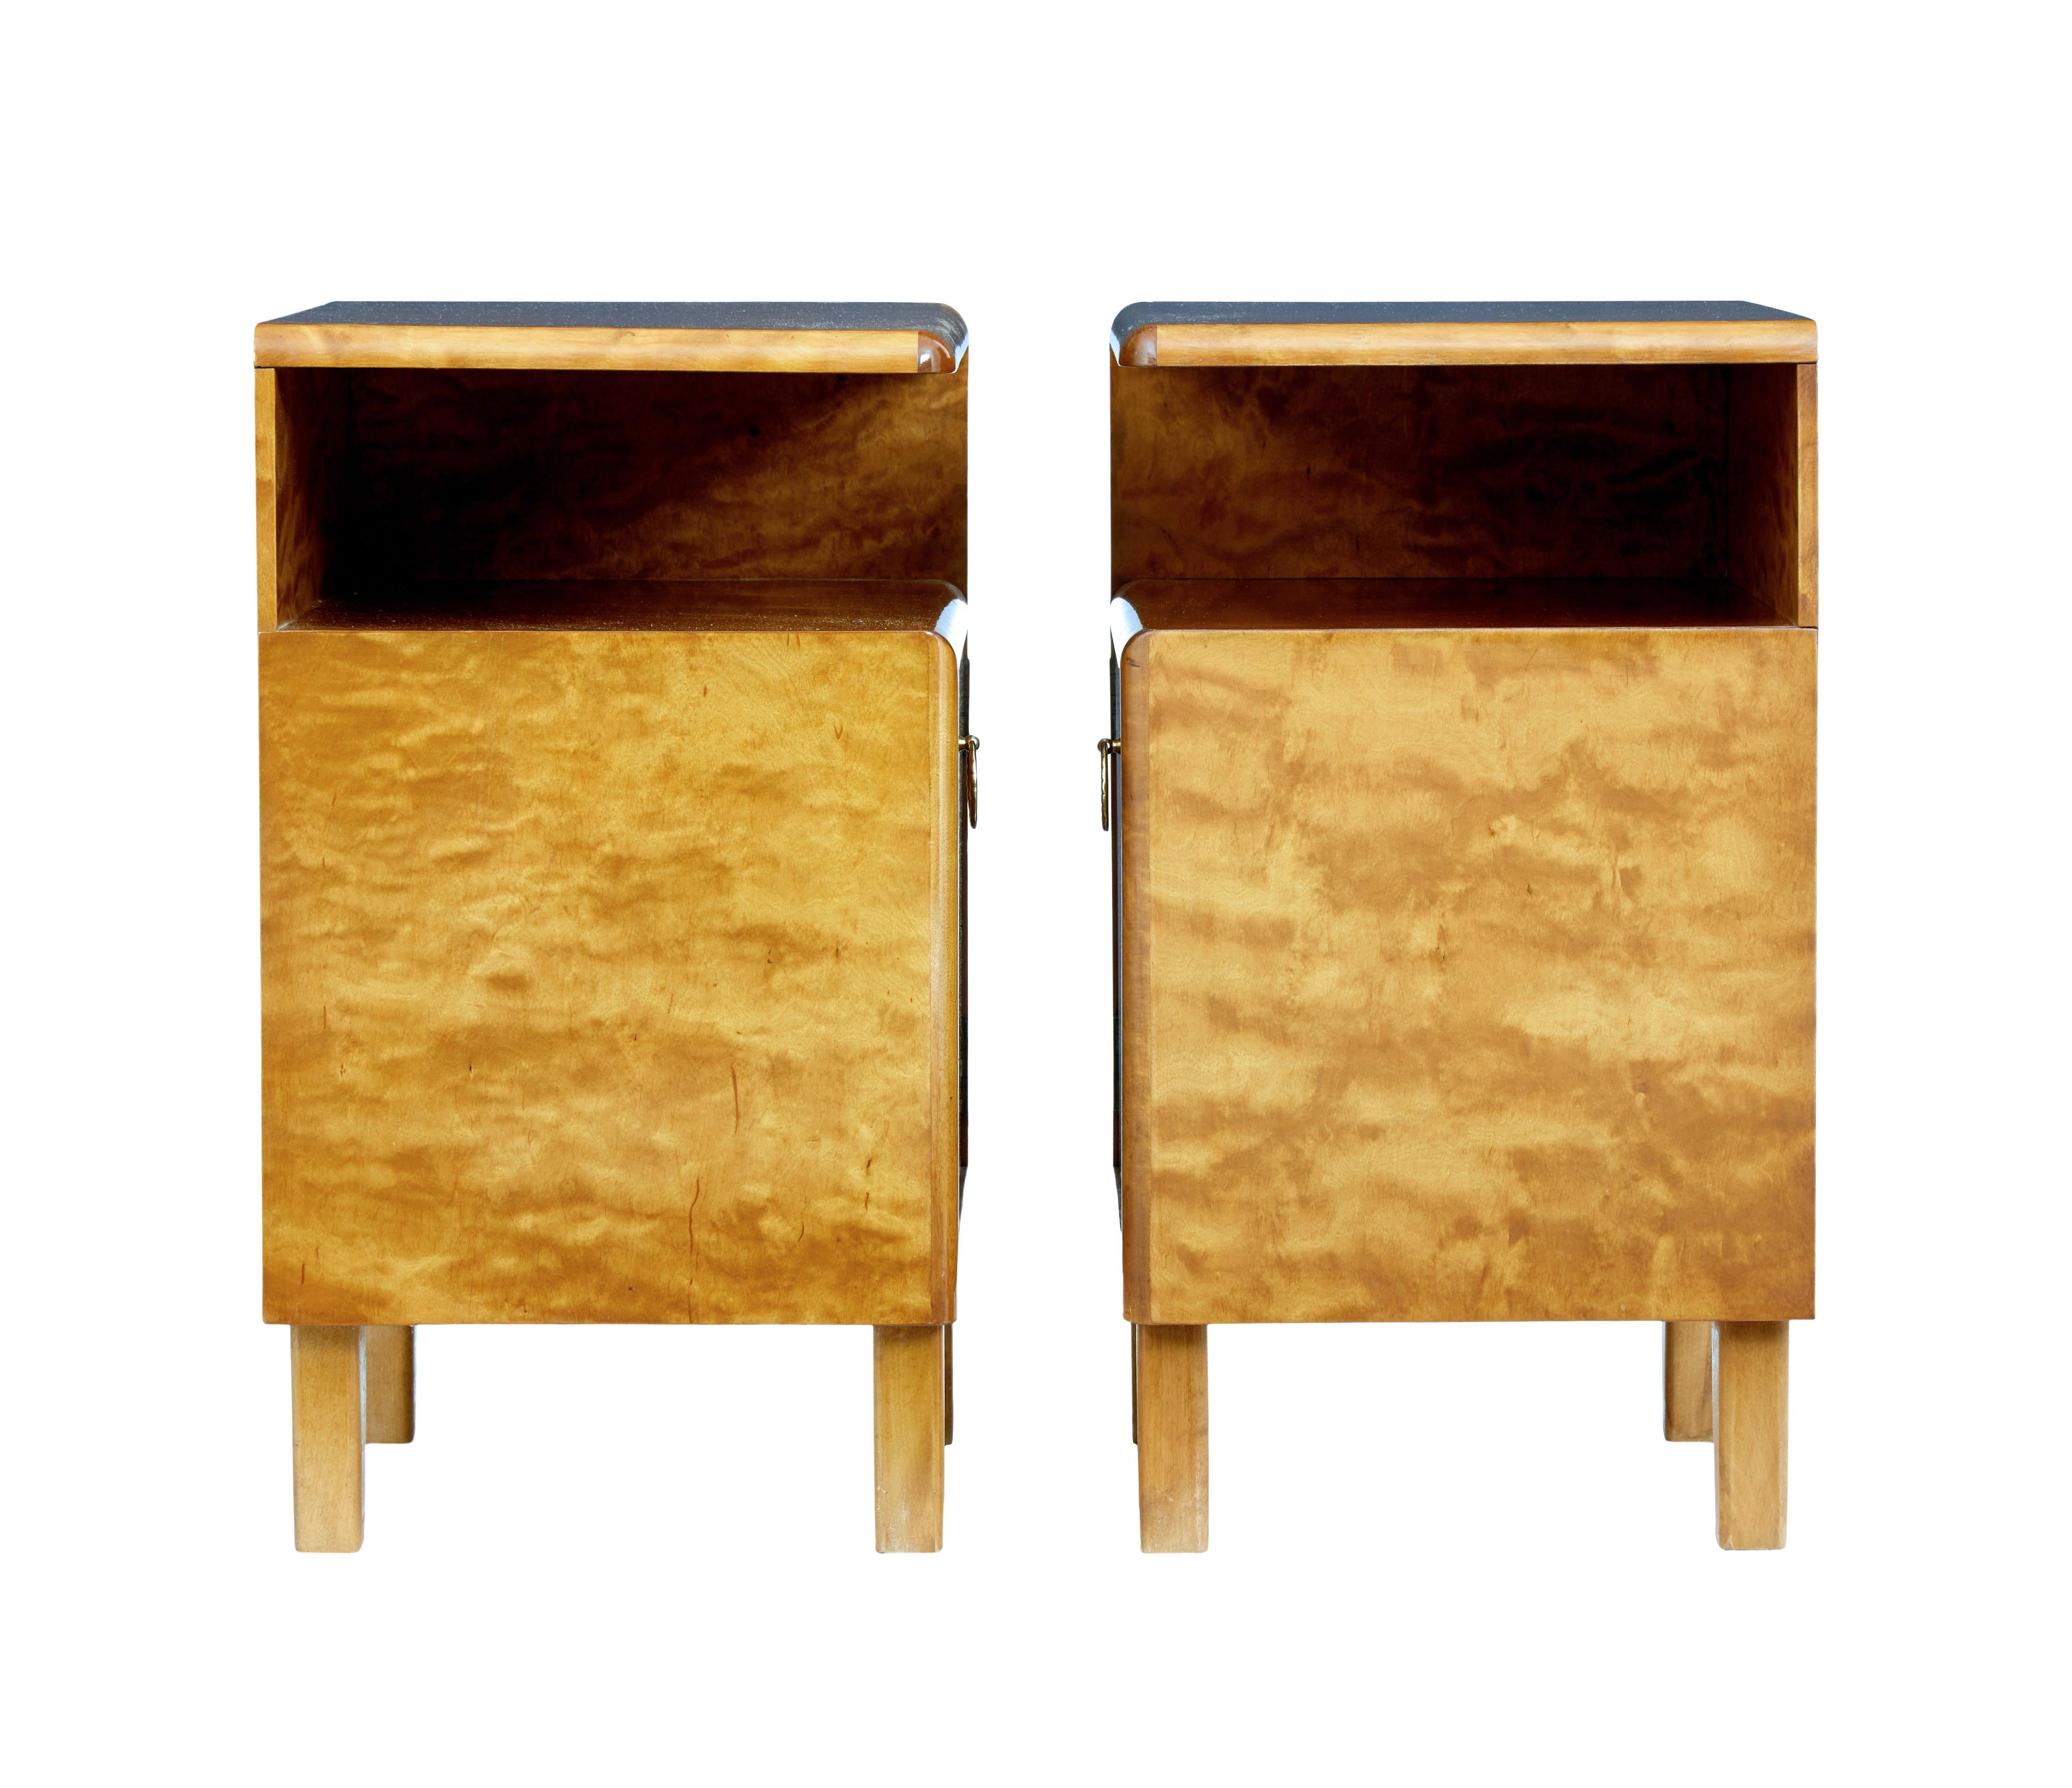 Pair of Mid-20th Century Swedish Birch Bedside Tables by Mobel AB Altorp In Good Condition In Debenham, Suffolk